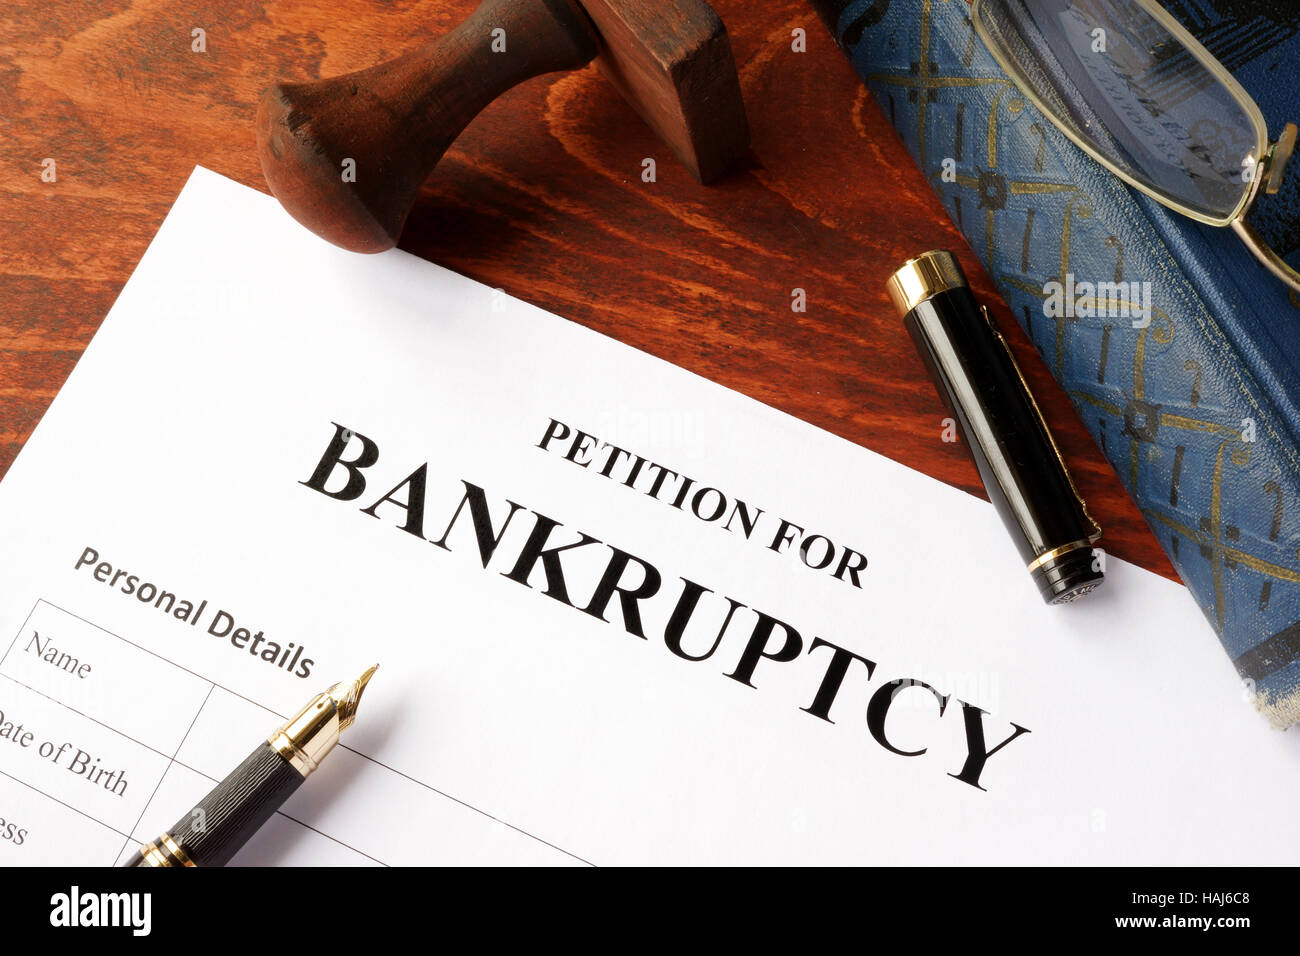 Petition for Bankruptcy on an office table. Stock Photo